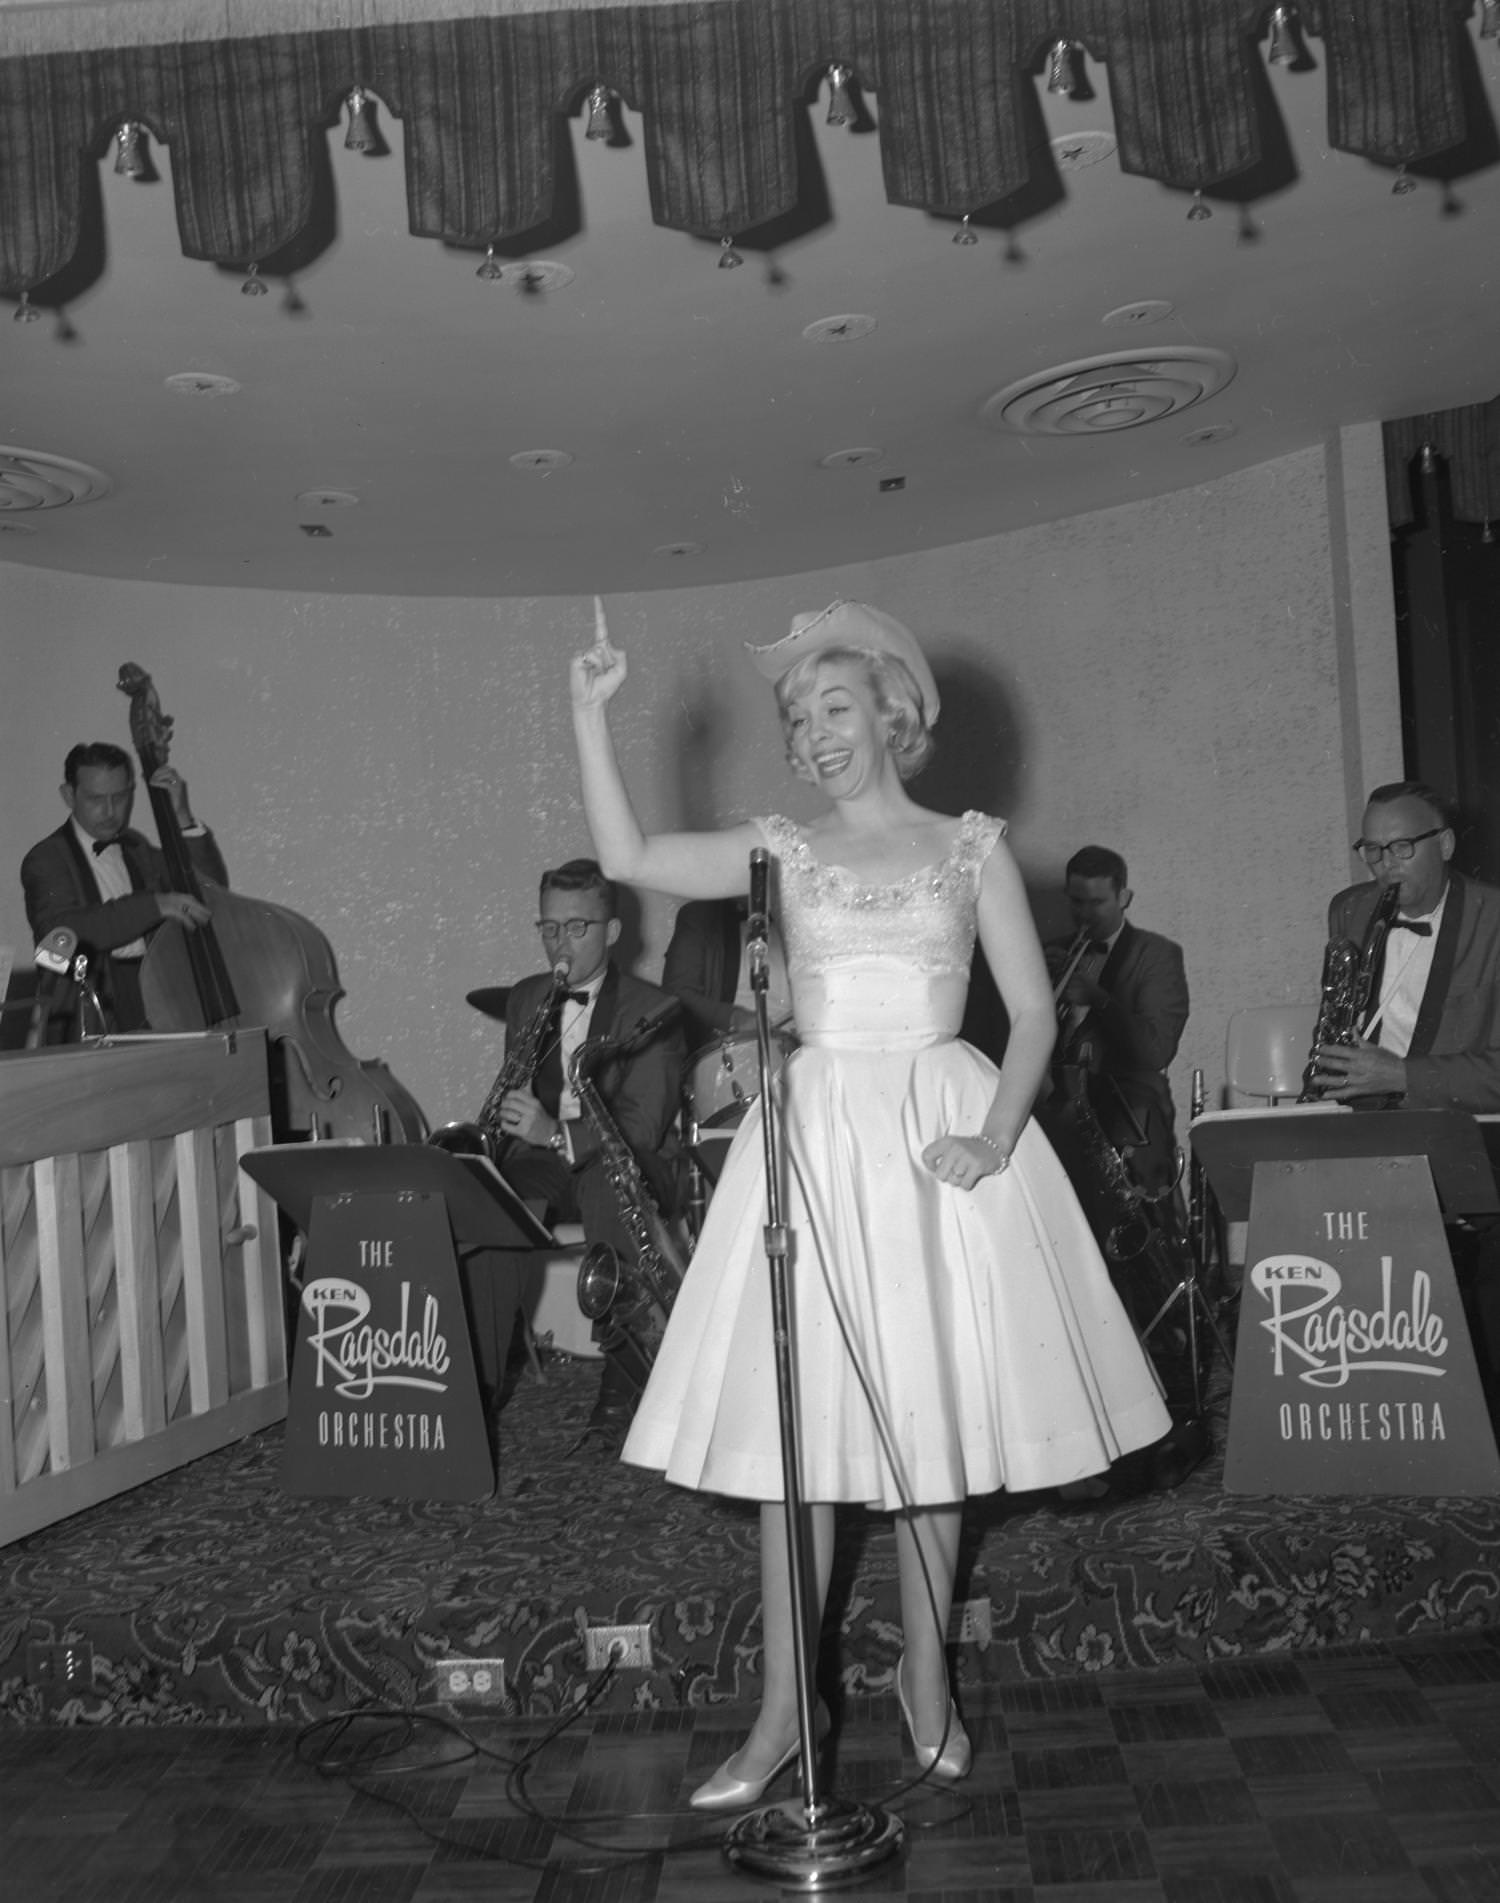 A performer on stage during the opening night of Club Caravan, located at 2360 North Interstate 35, 1961